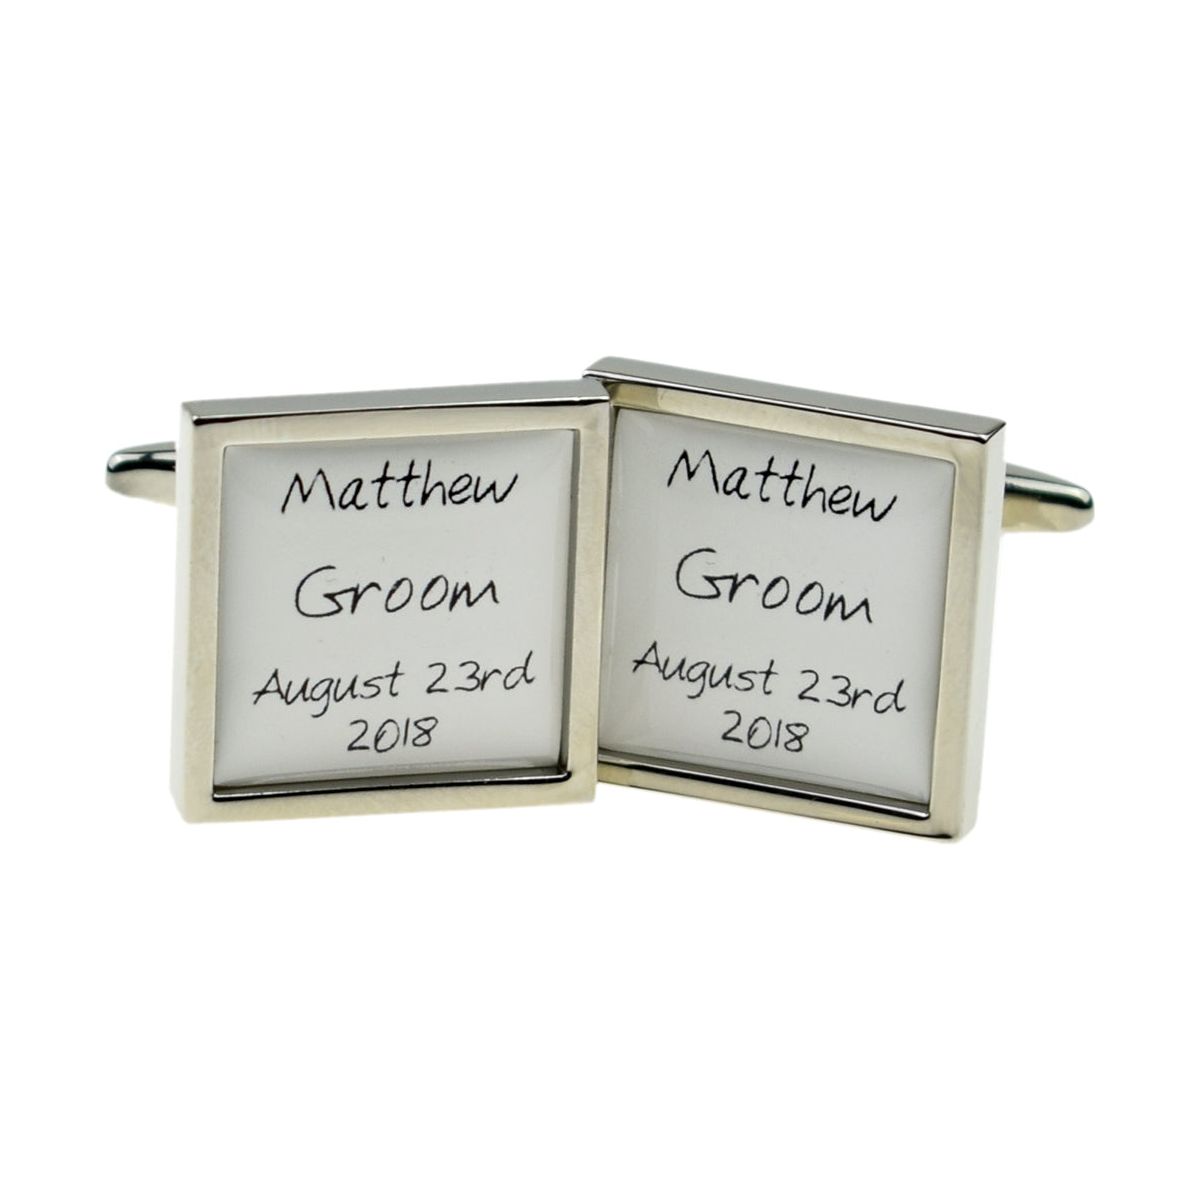 Bespoke Personalised Square Wedding Text Cufflinks - Ashton and Finch